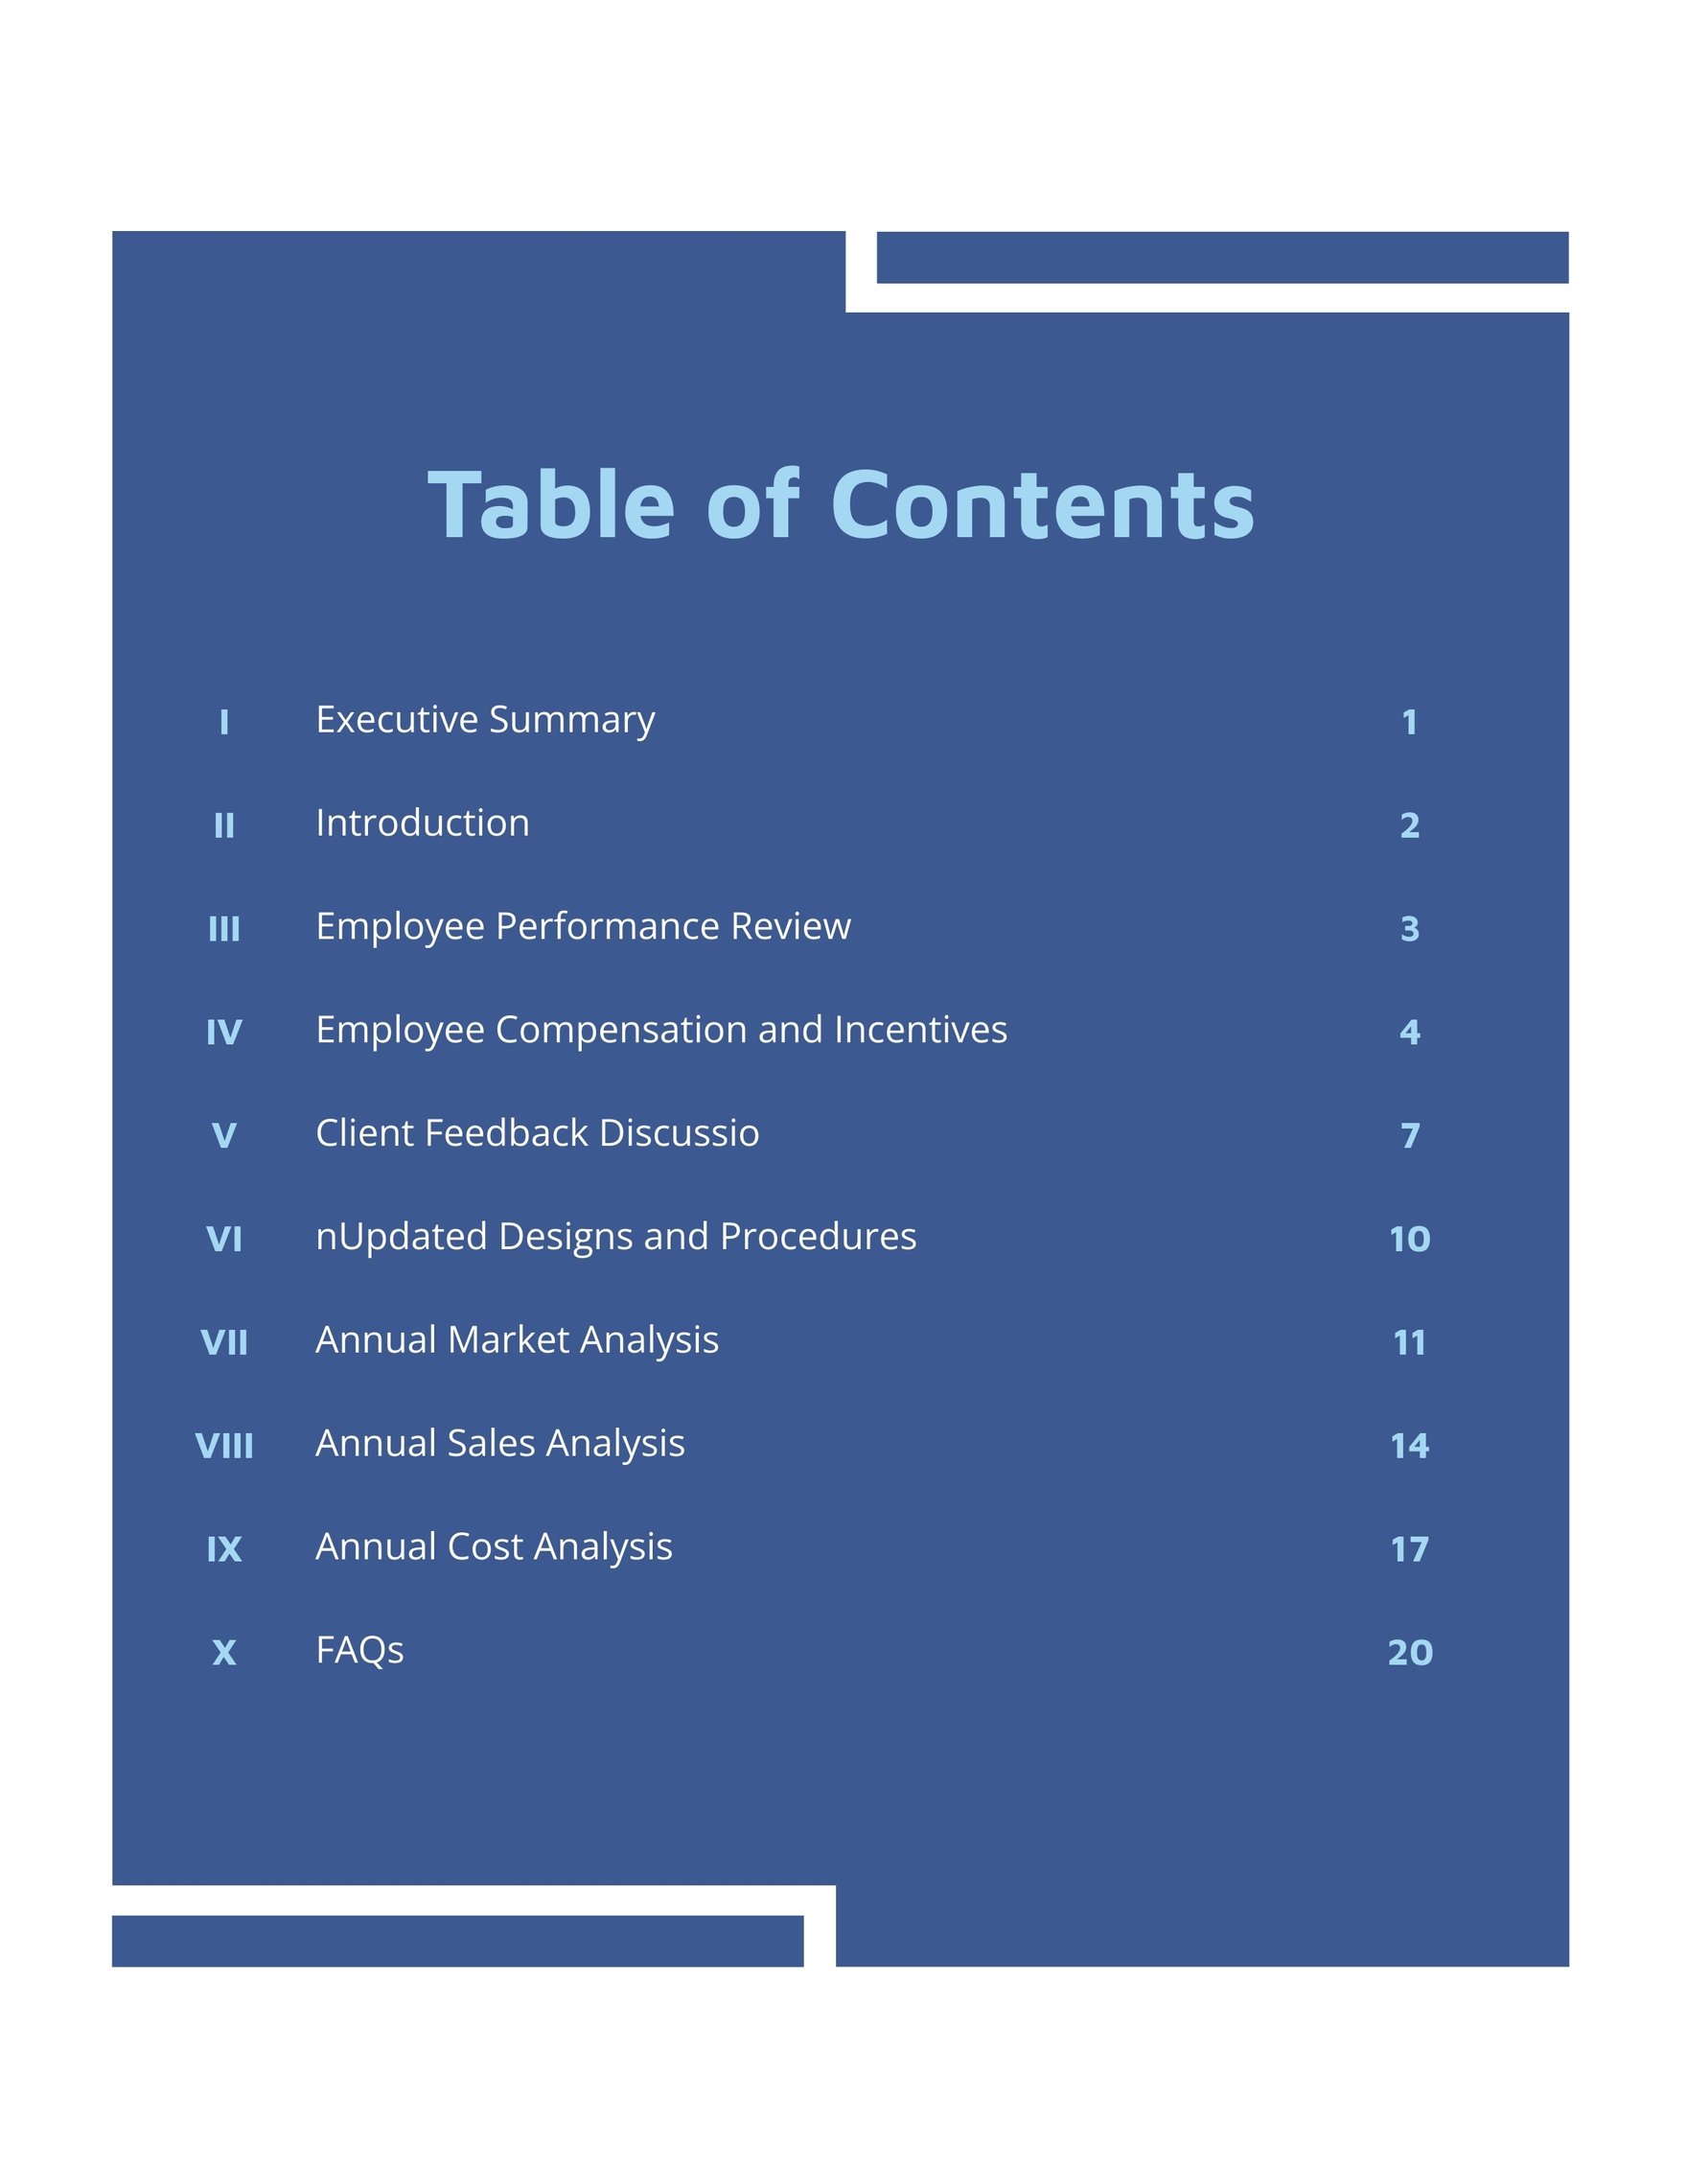 Generic Table of Contents Template   Google Docs, Word, Apple ...